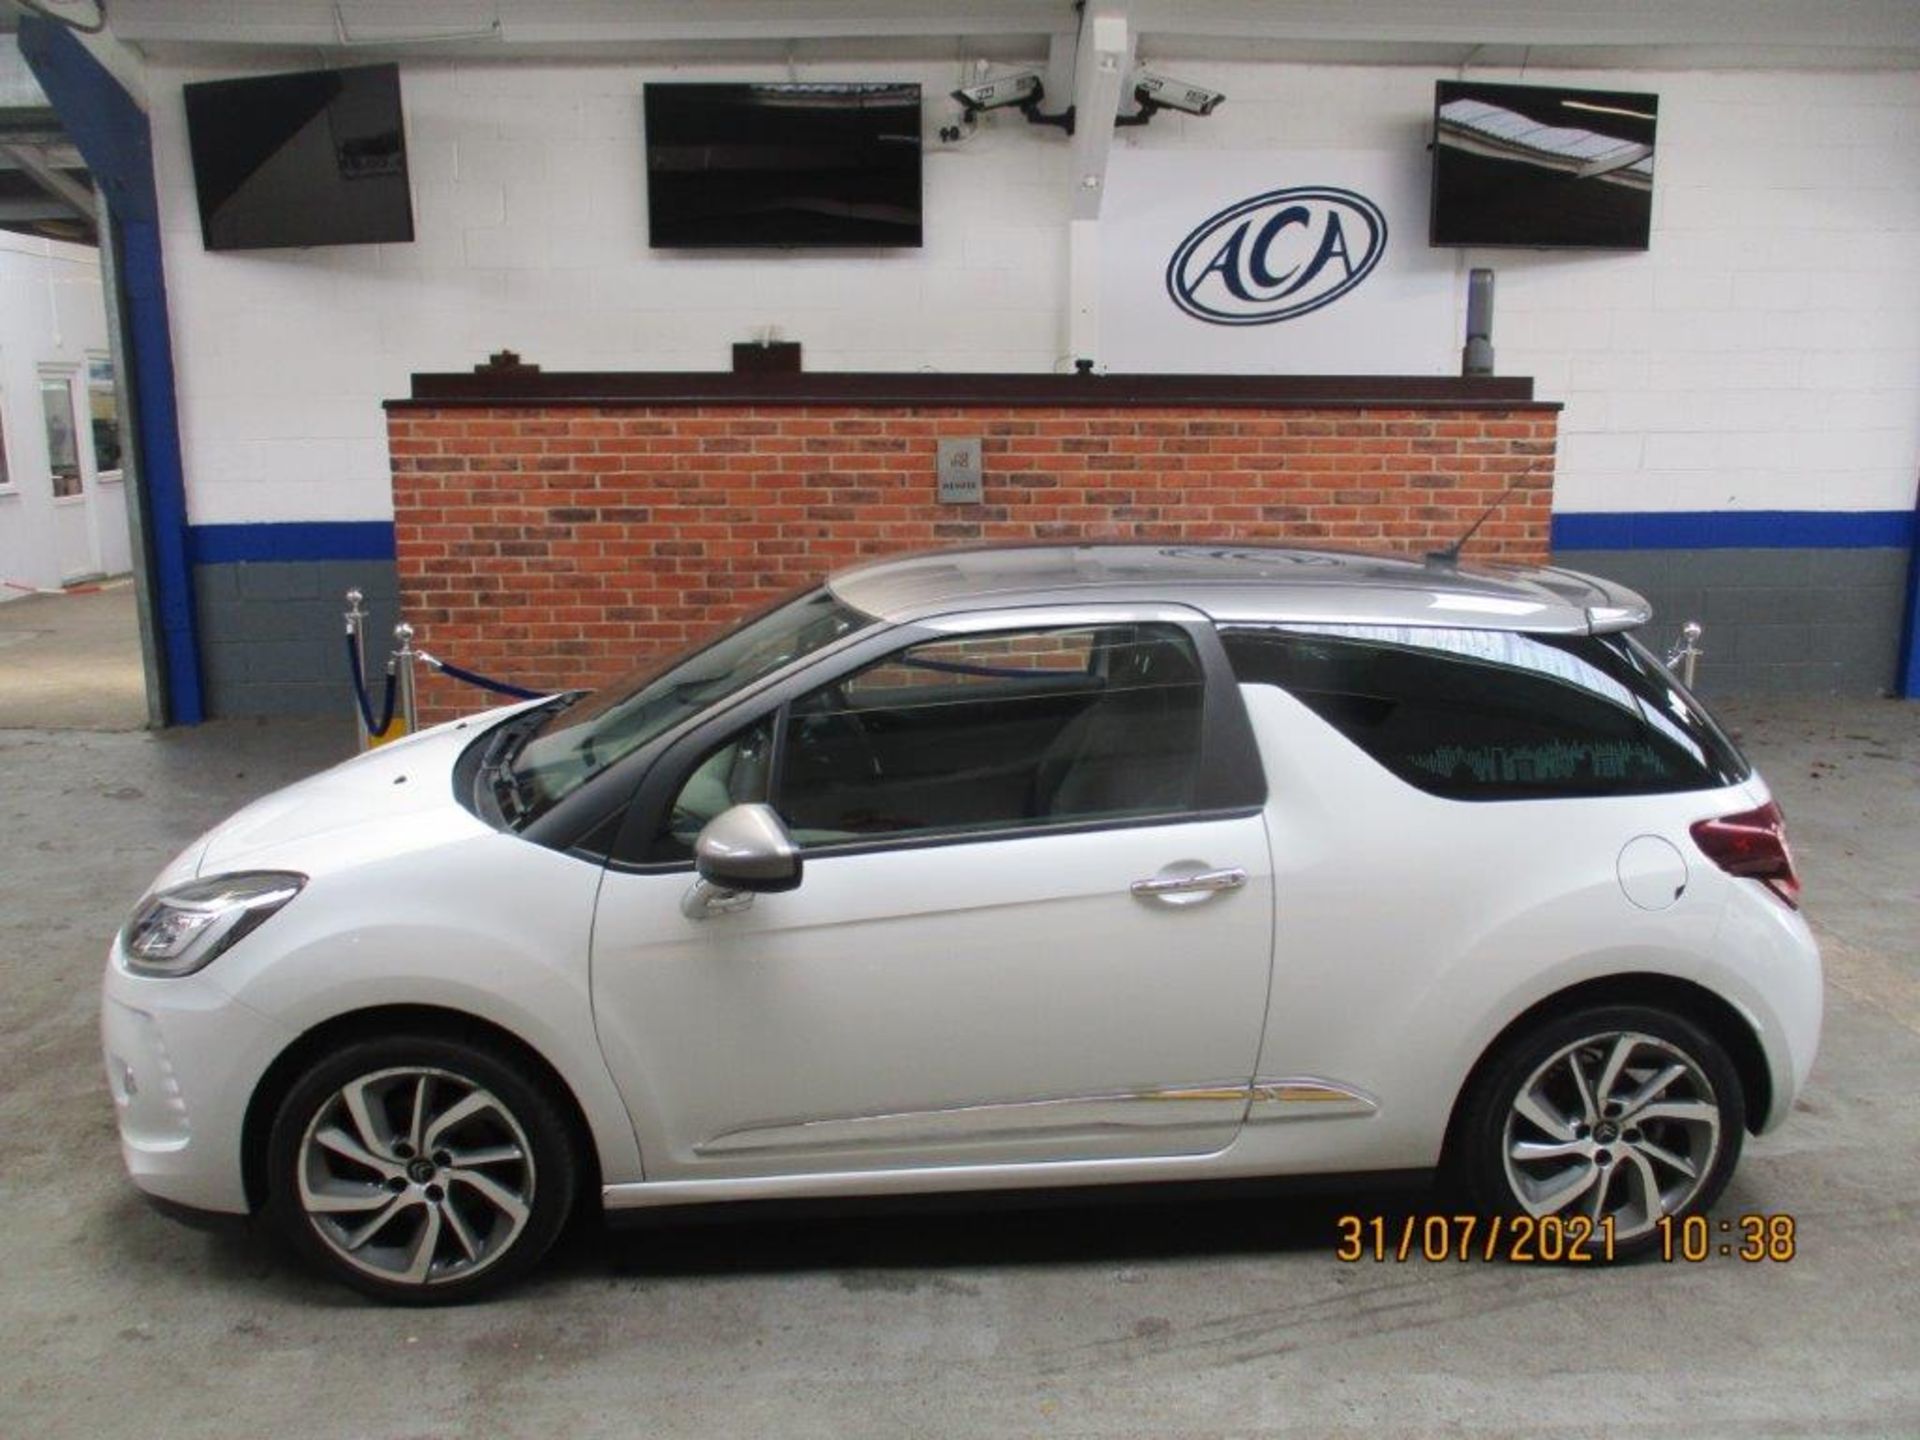 64 14 Citreon DS3 Dsytle Techno - Image 2 of 25